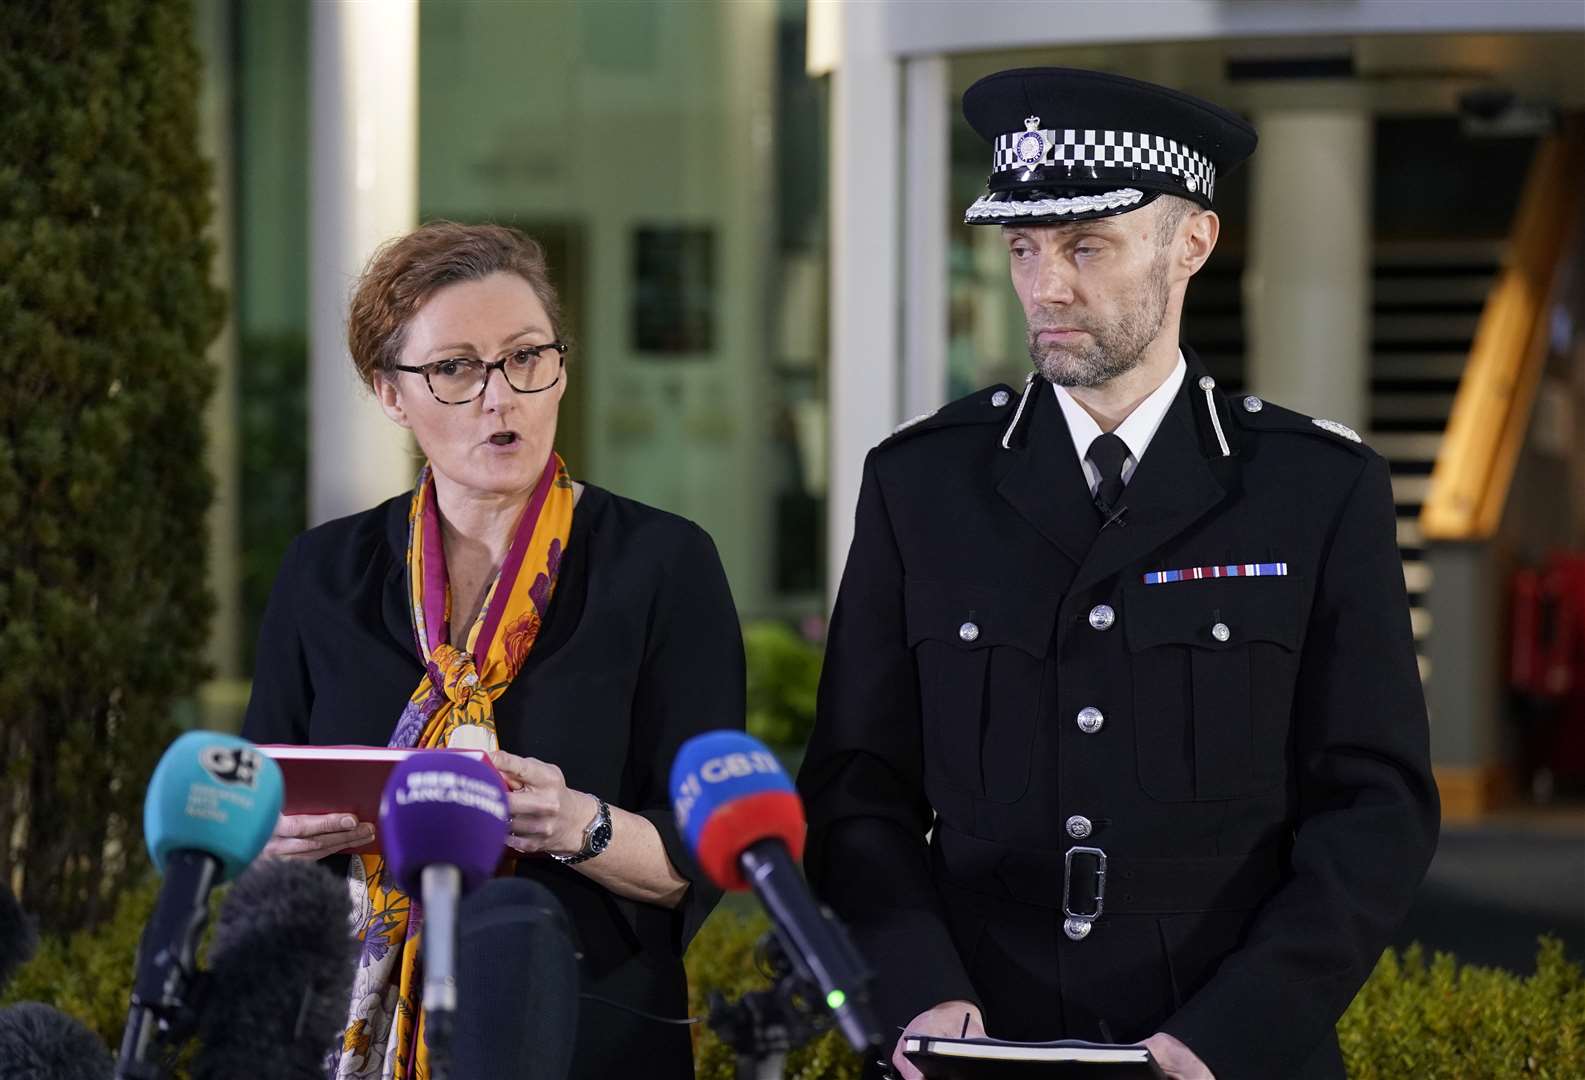 Assistant Chief Constable Peter Lawson (right) of Lancashire Police with Detective Chief Superintendent Pauline Stables (left) speaking at a press conference outside the force’s HQ (Owen Humphreys/PA)